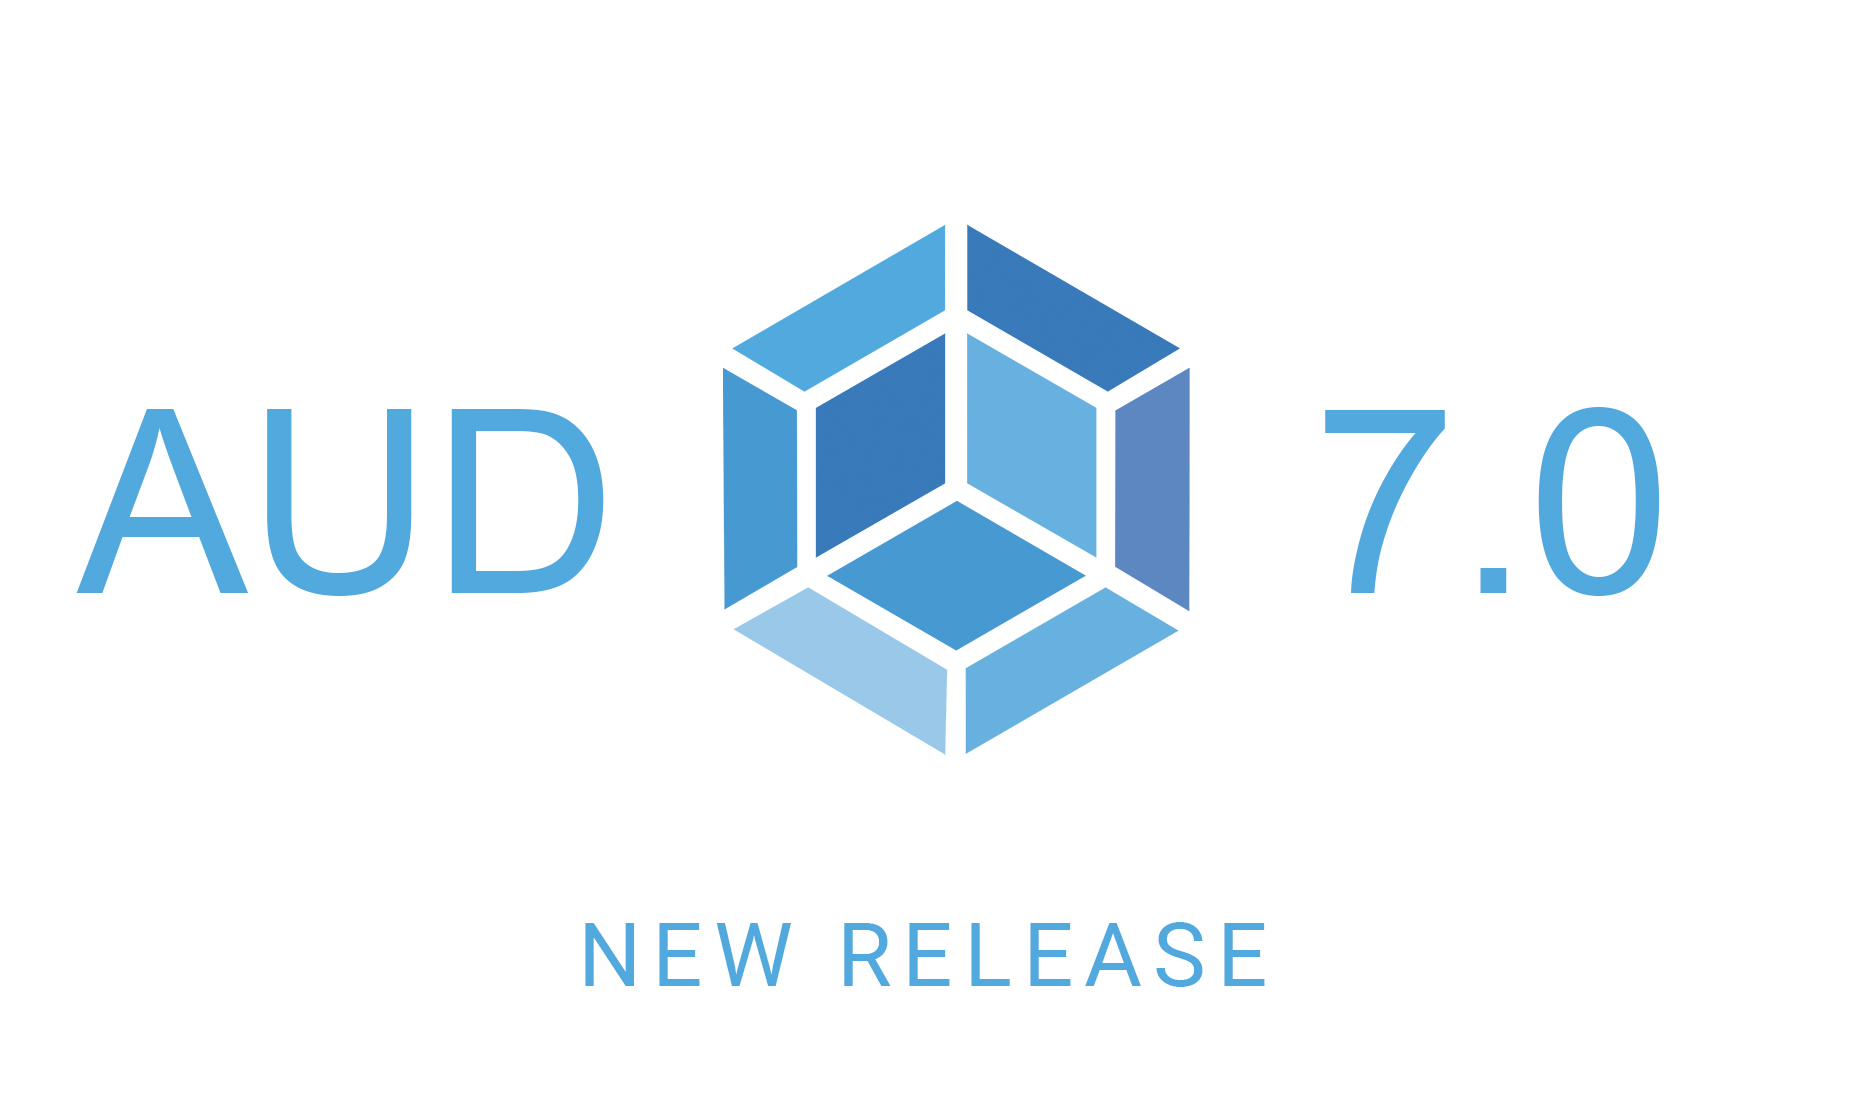 New Release of AUD 7.0